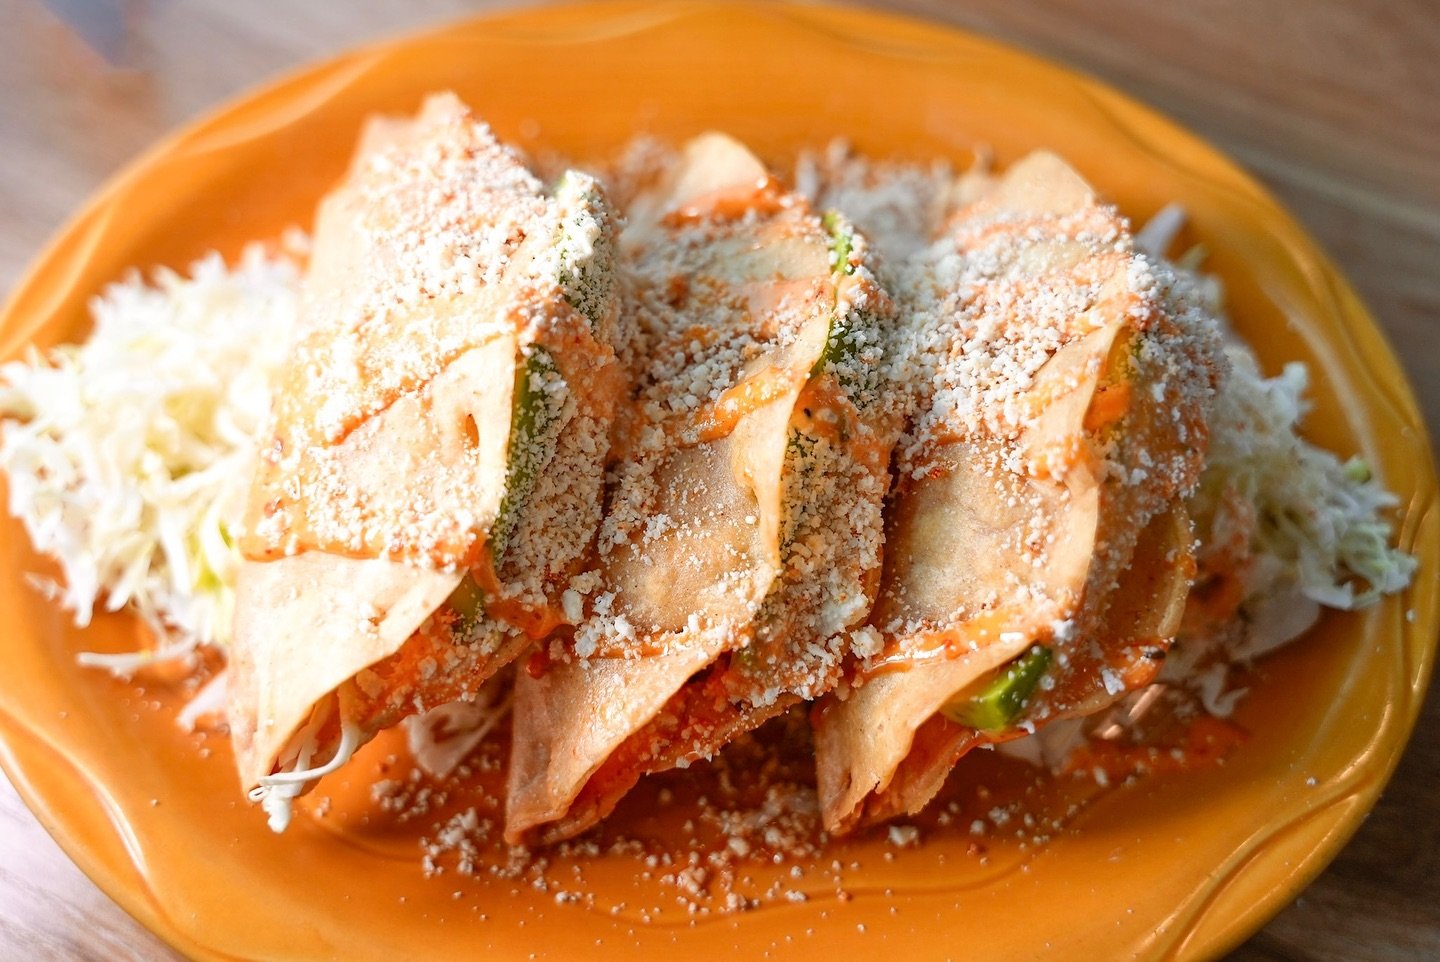 Dive into our crispy taco dorados! Perfectly crunchy and loaded with flavor. 👨&zwj;🍳 😋 
#crunchtime #tacolove #gardena #delicious